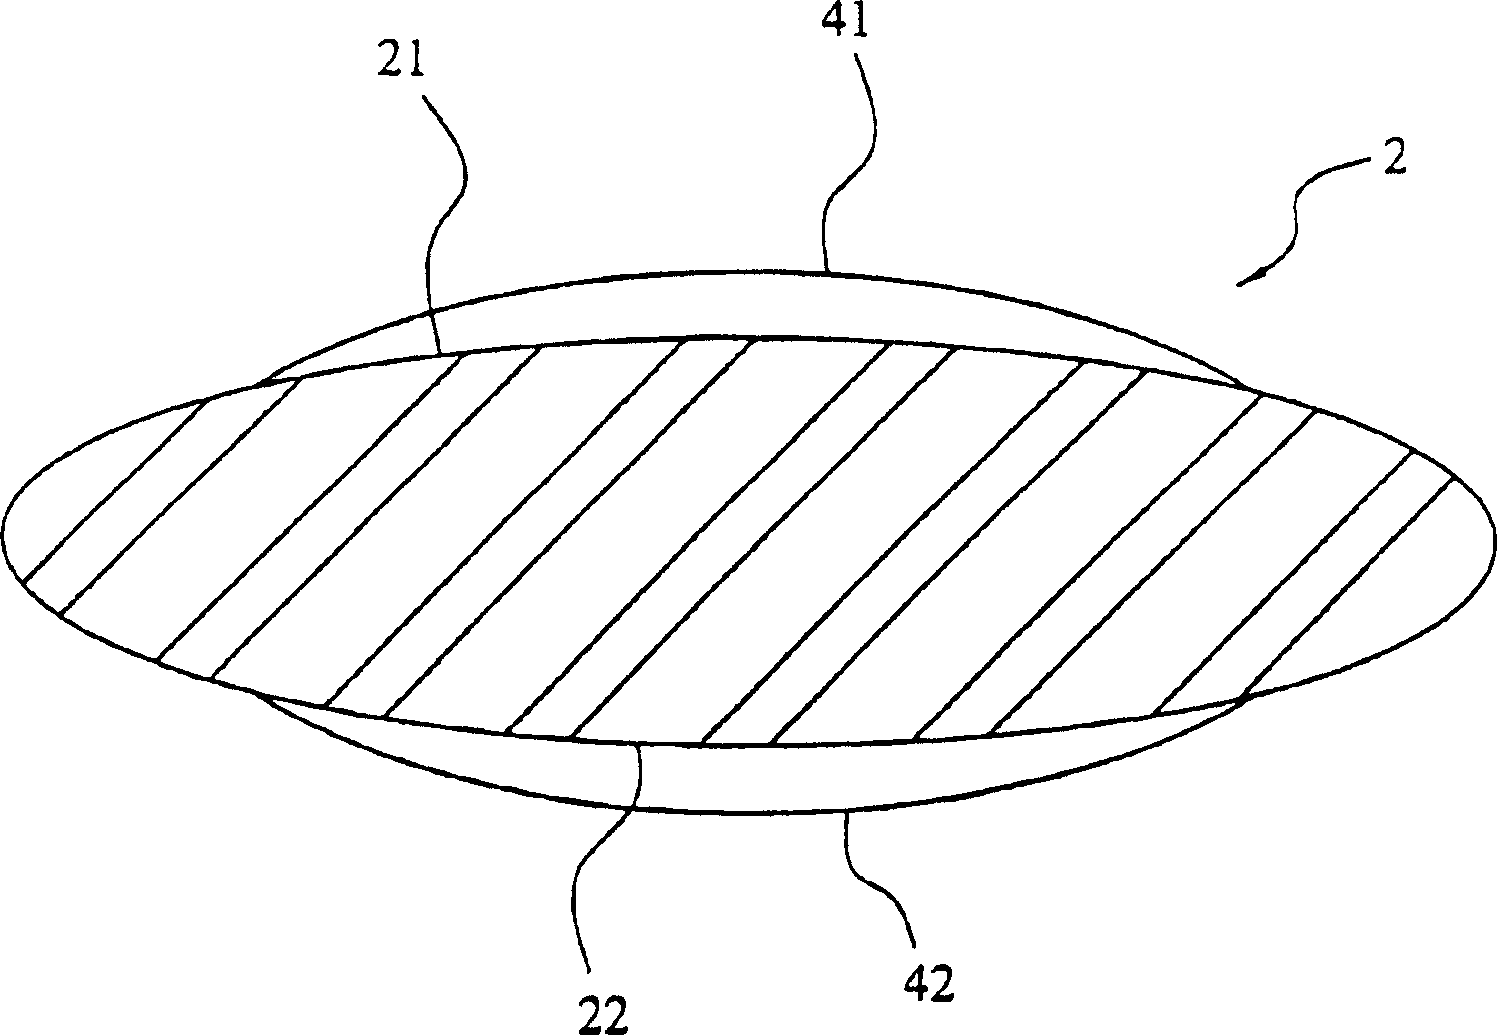 Artificial crystalline lens with optical catalytic coating